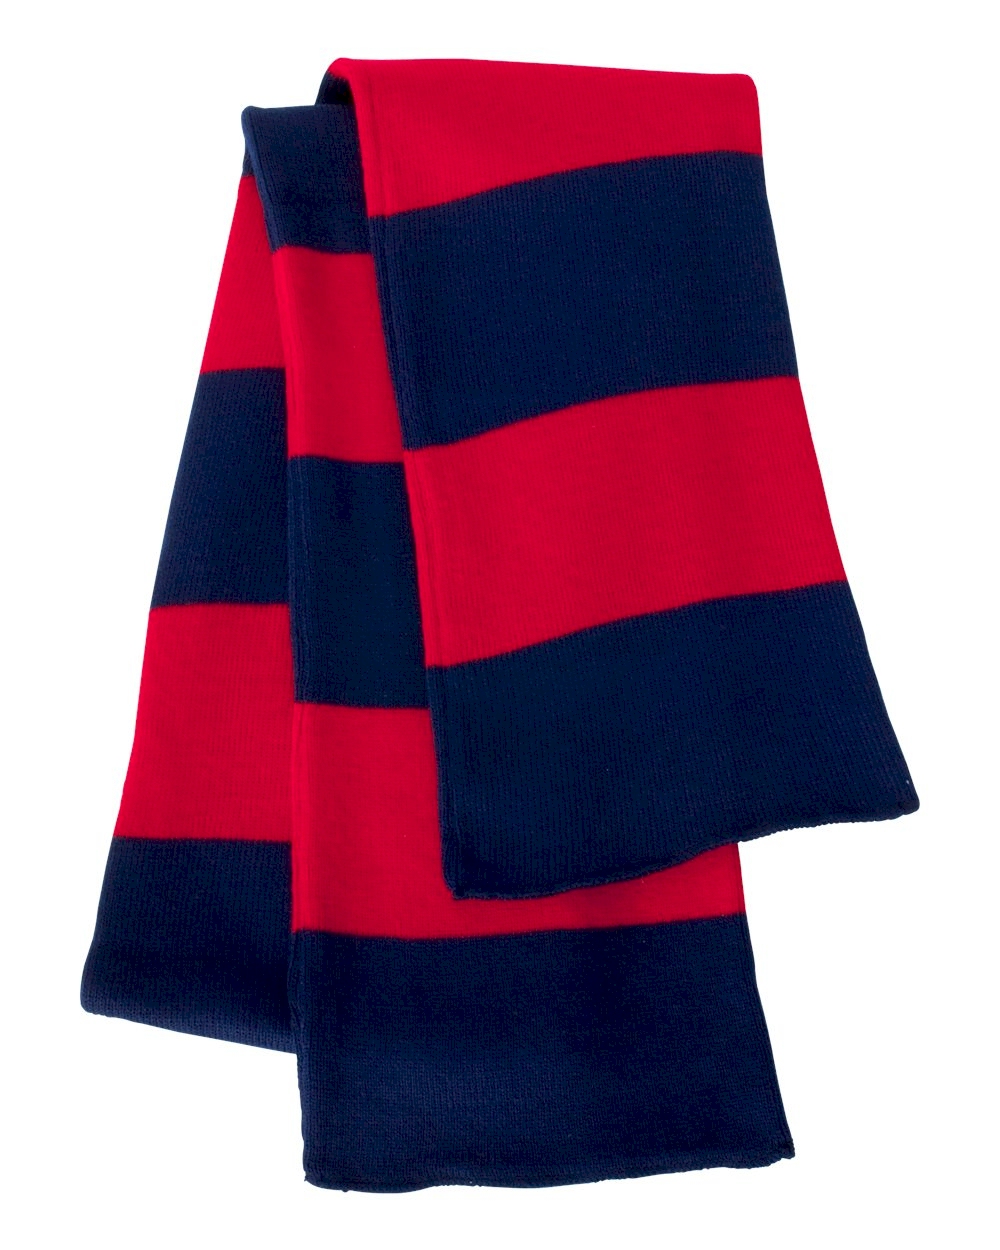 Rugby Striped Knit Scarf Embroidery Blanks - NAVY/RED